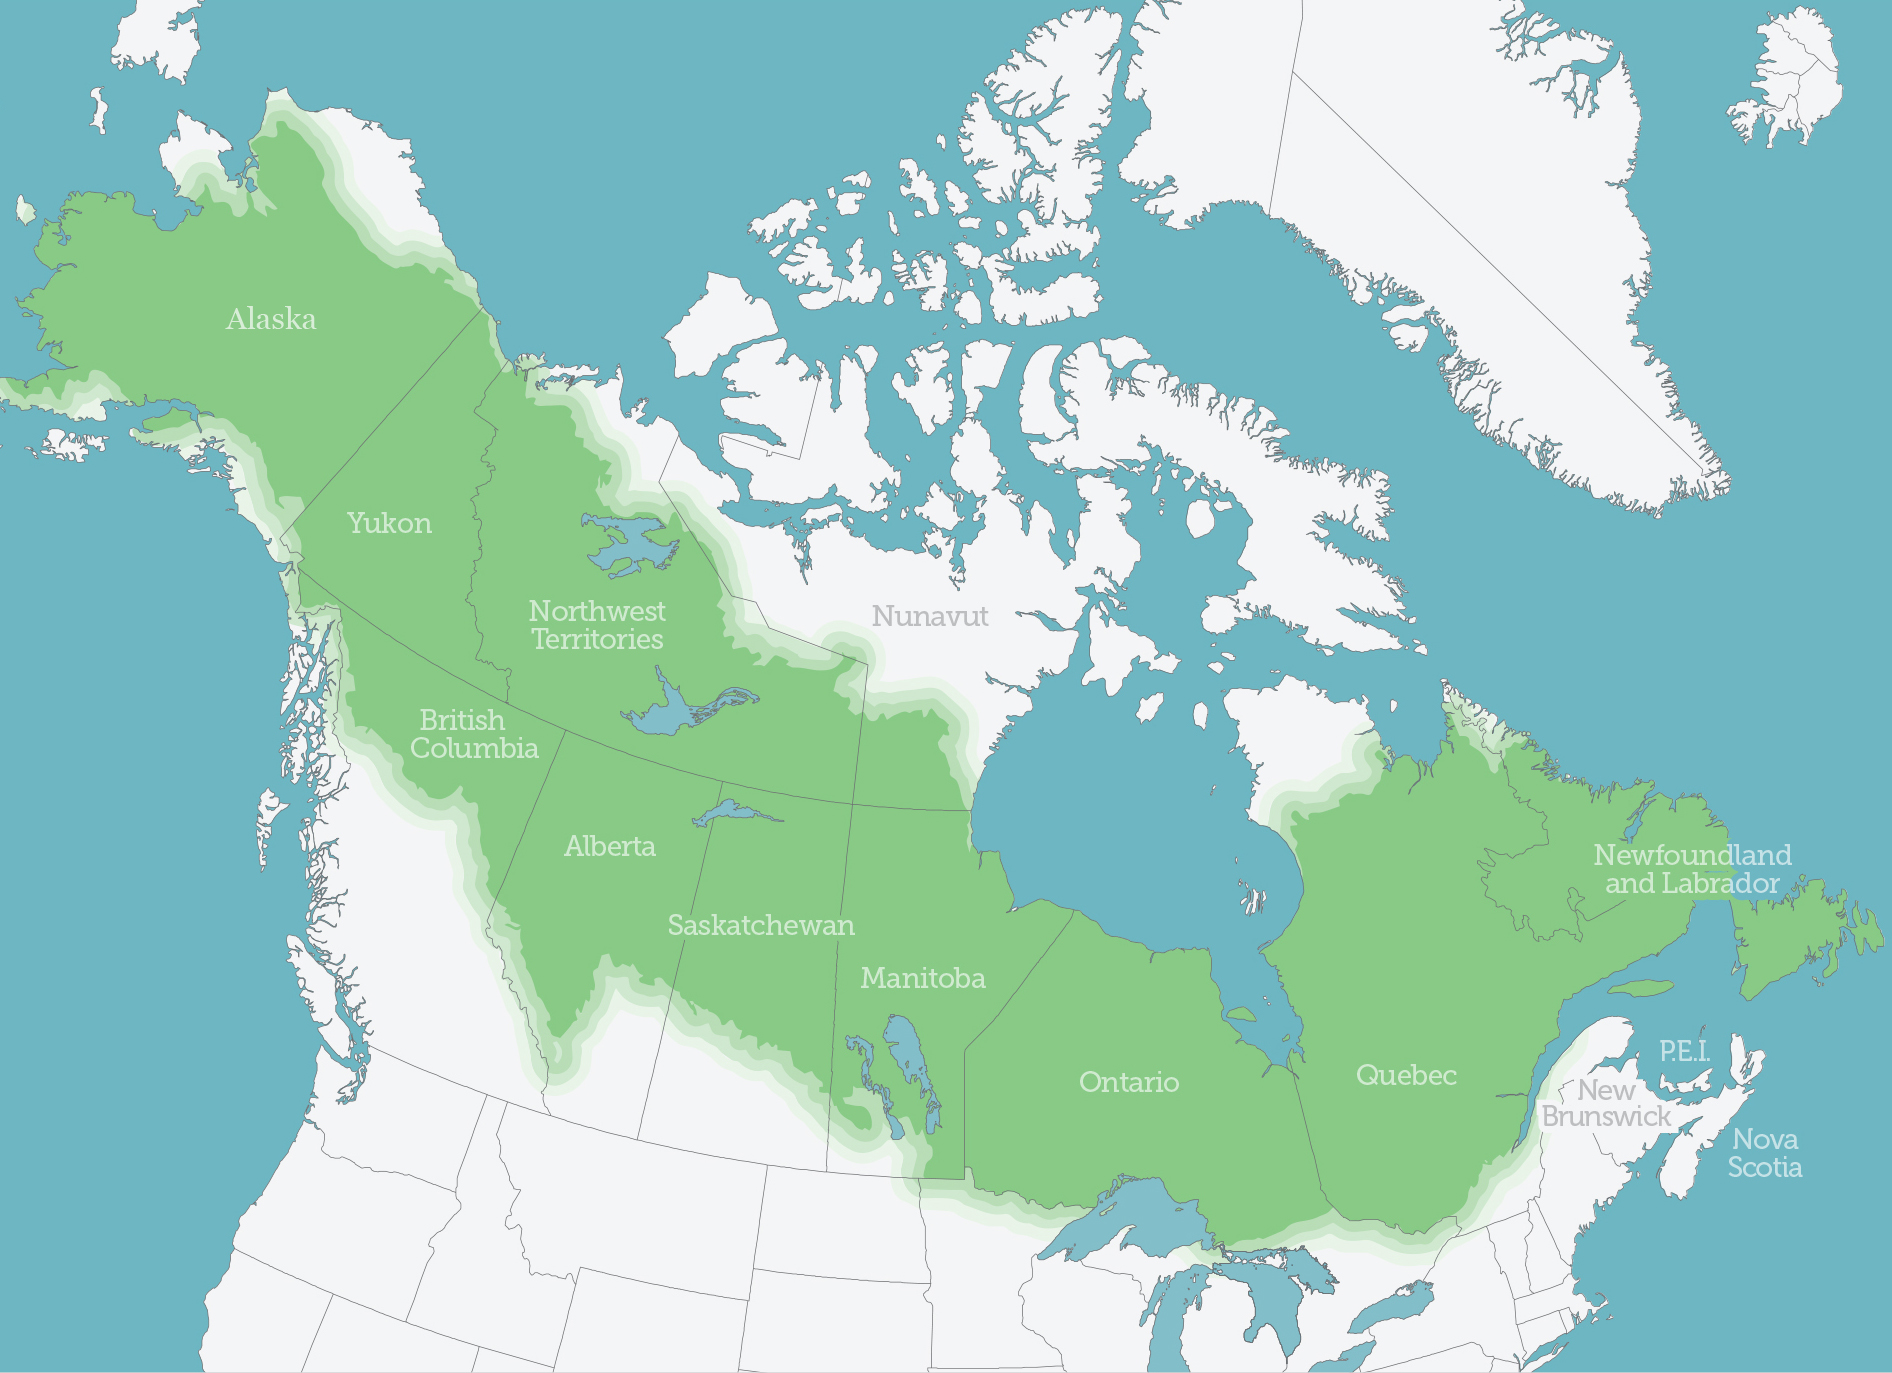 North America - Boreal Forest, Wildlife, Ecosystems